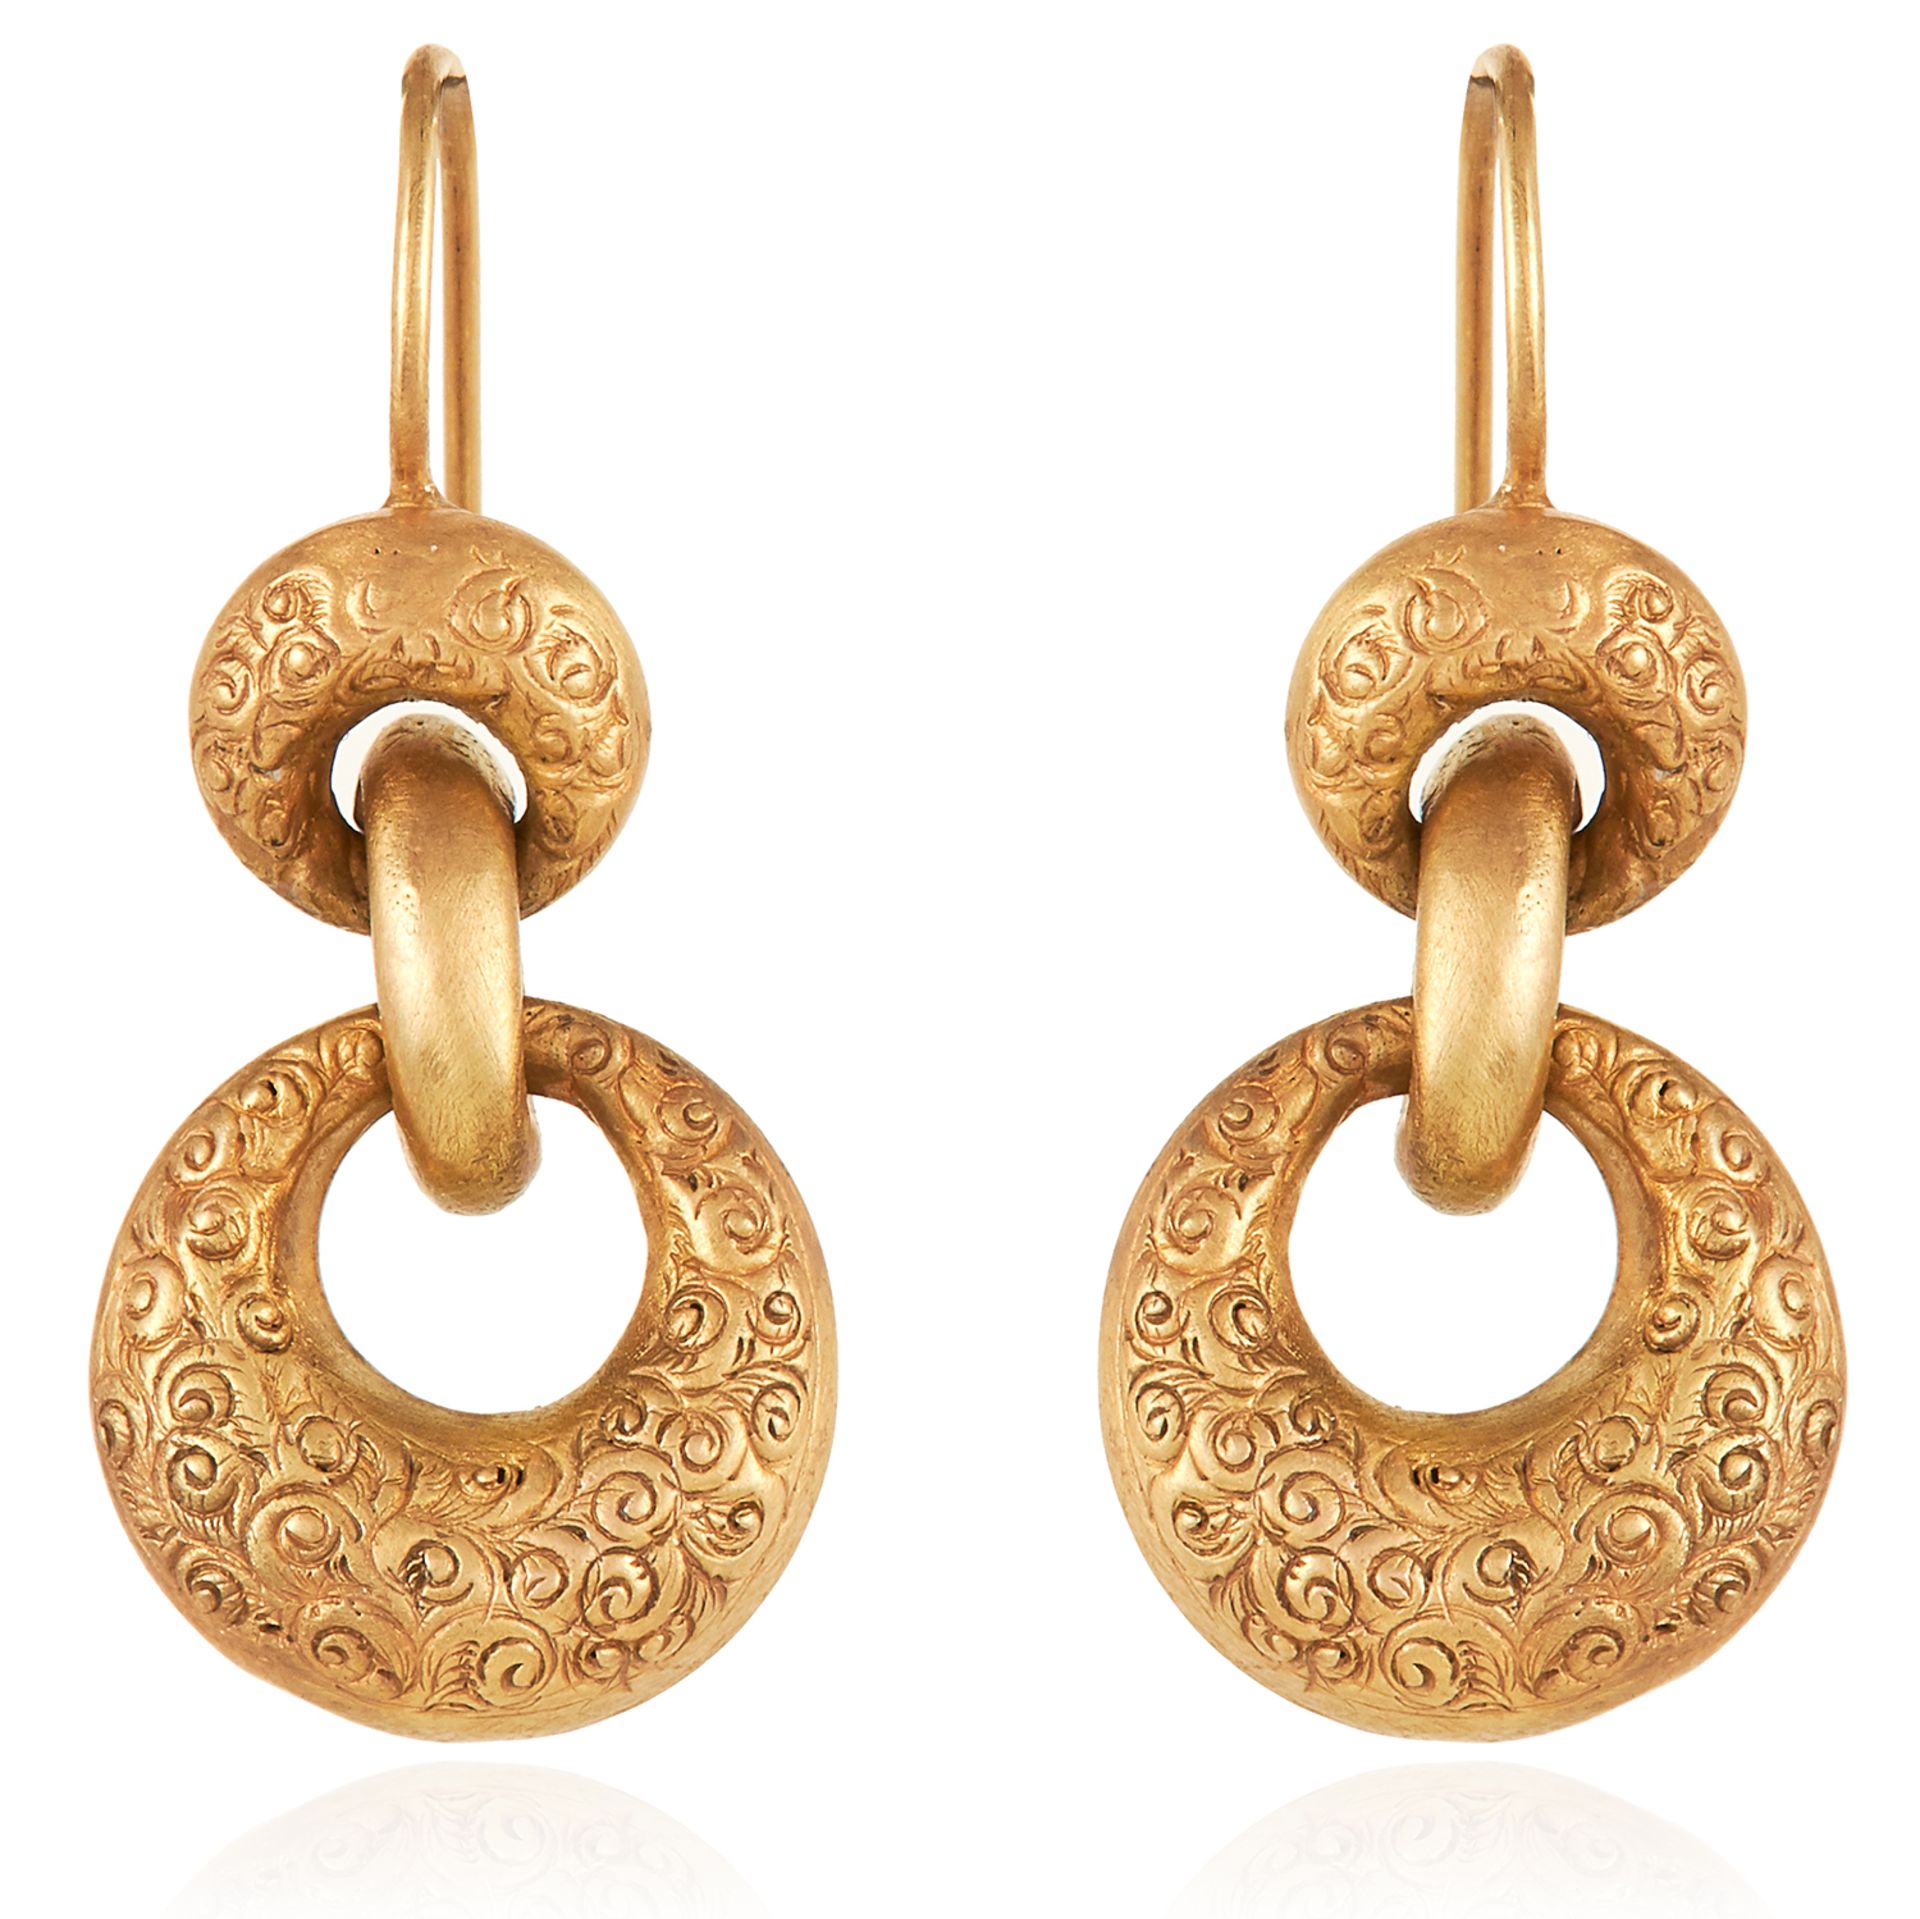 A PAIR OF ANTIQUE ARTICULATED DROP EARRINGS, 19TH CENTURY in high carat yellow gold, designed as a